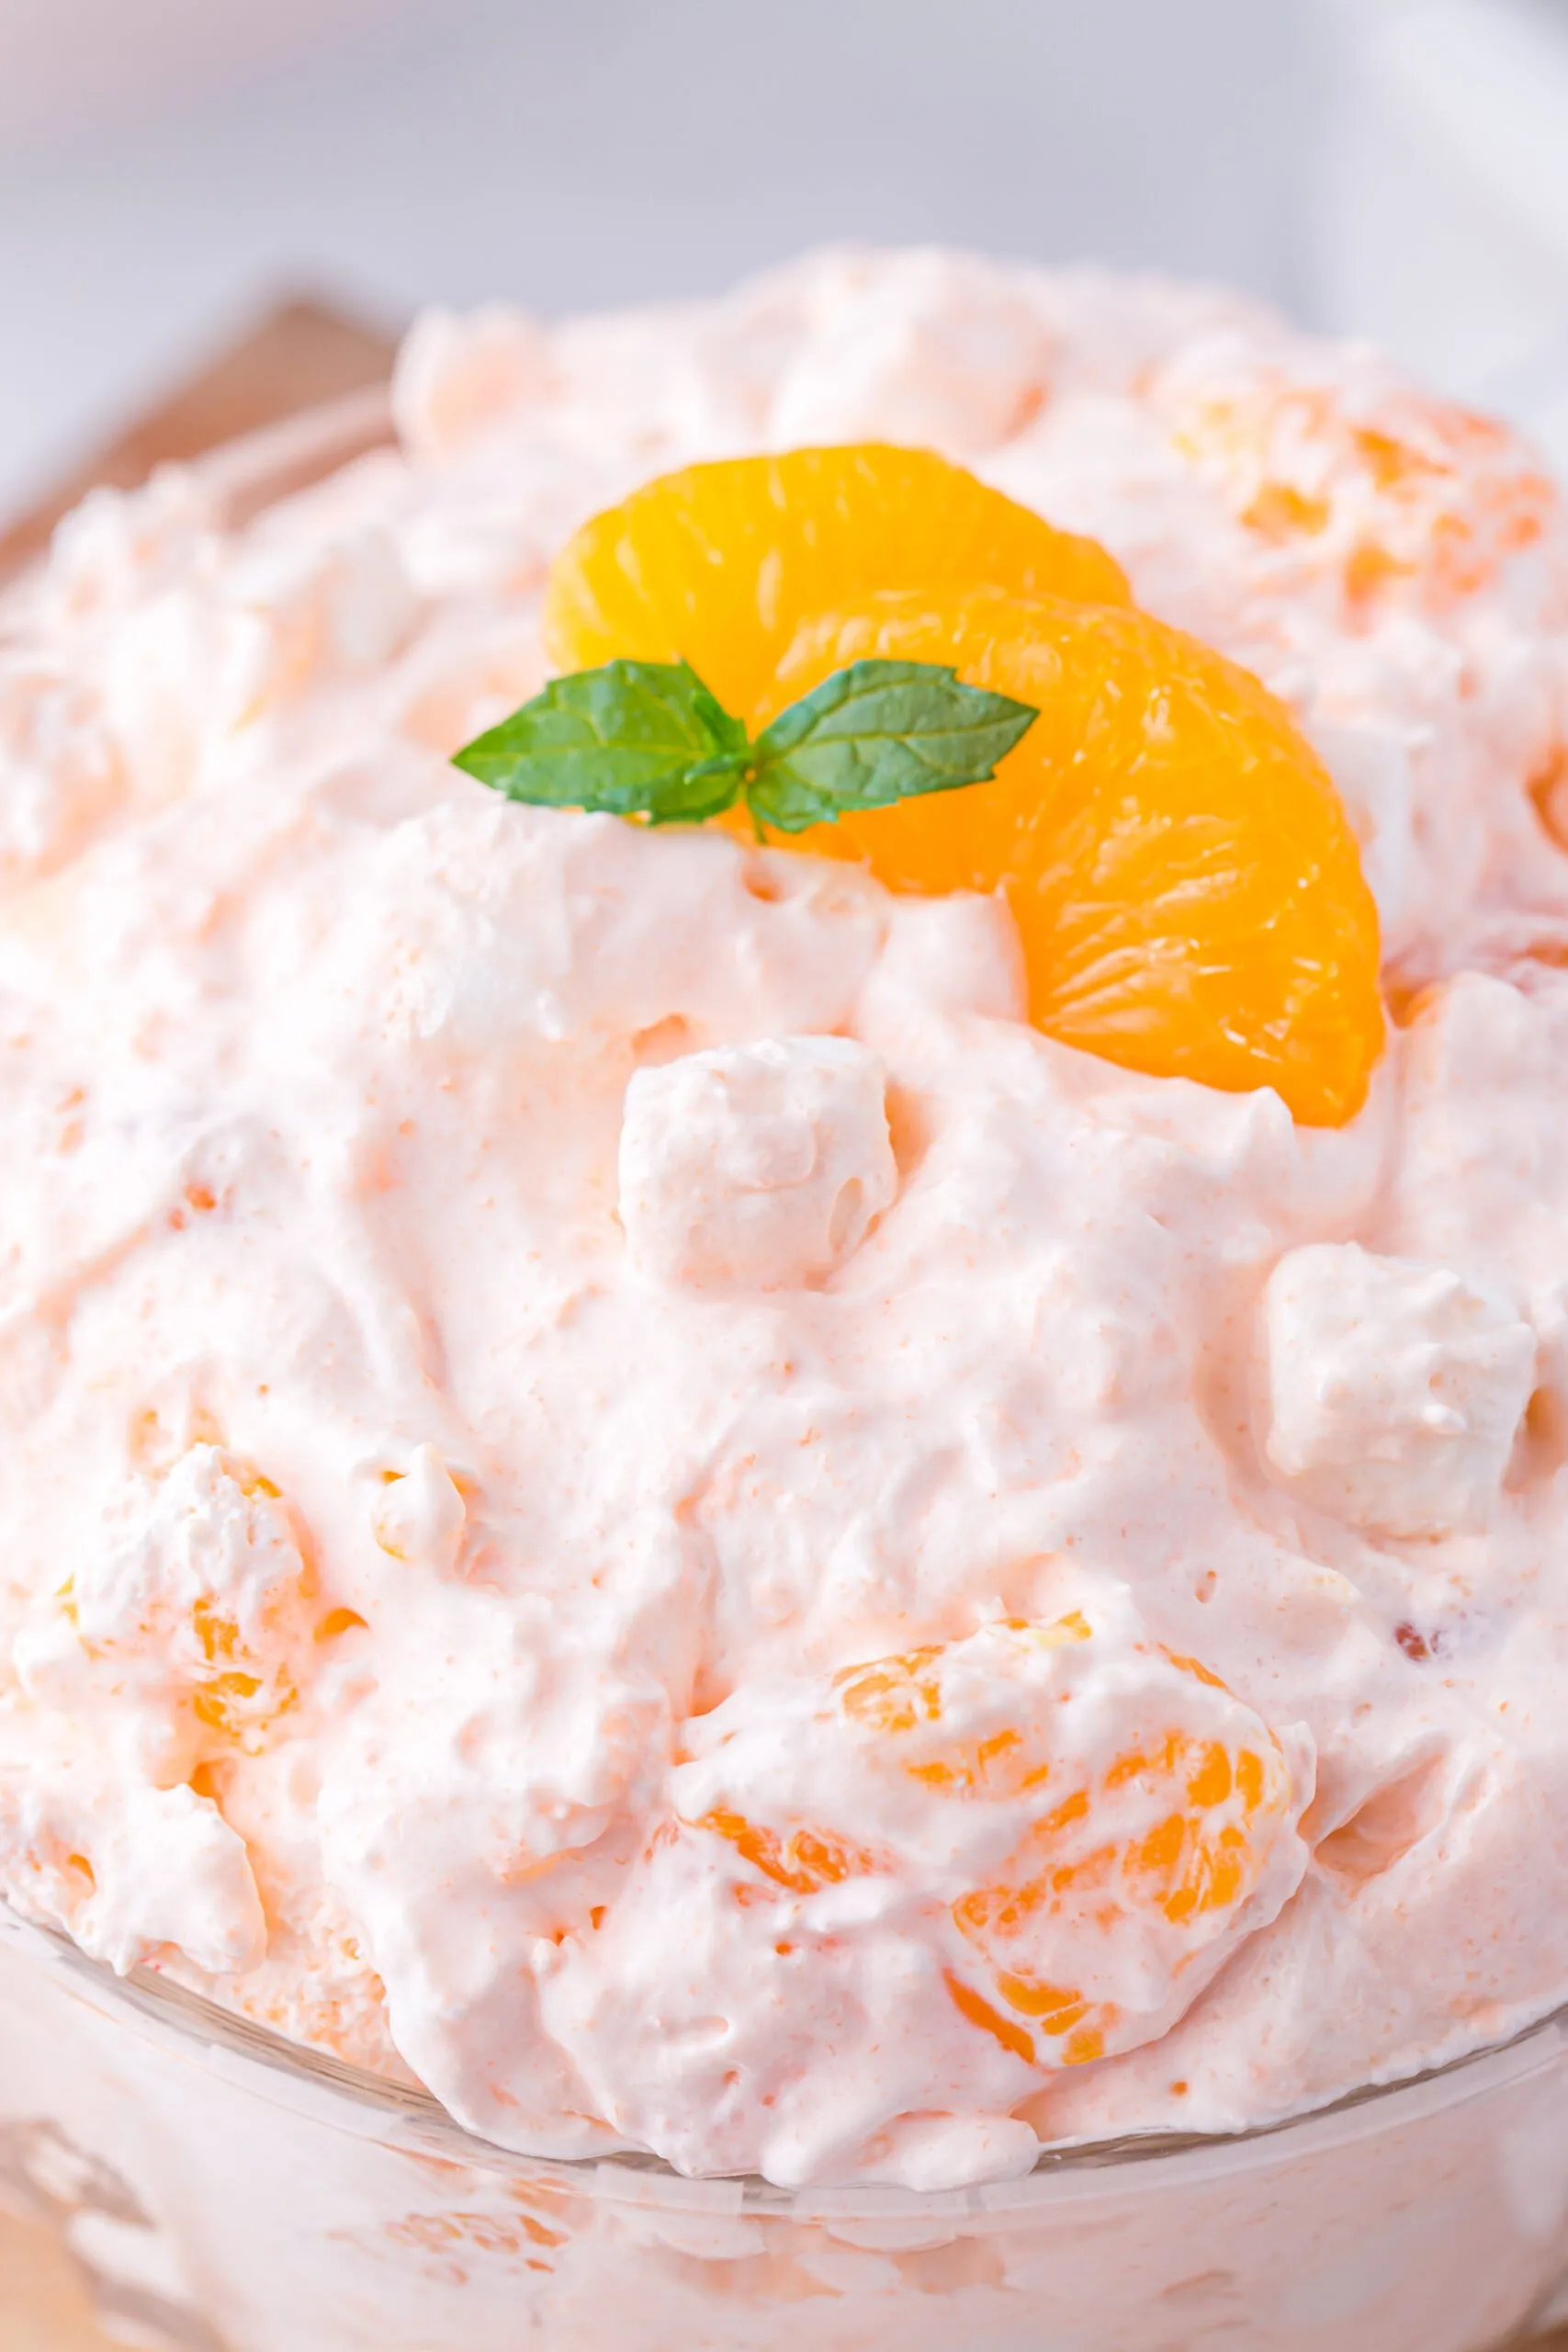 Tasty and Easy: How to Make Orange Fluff Recipe